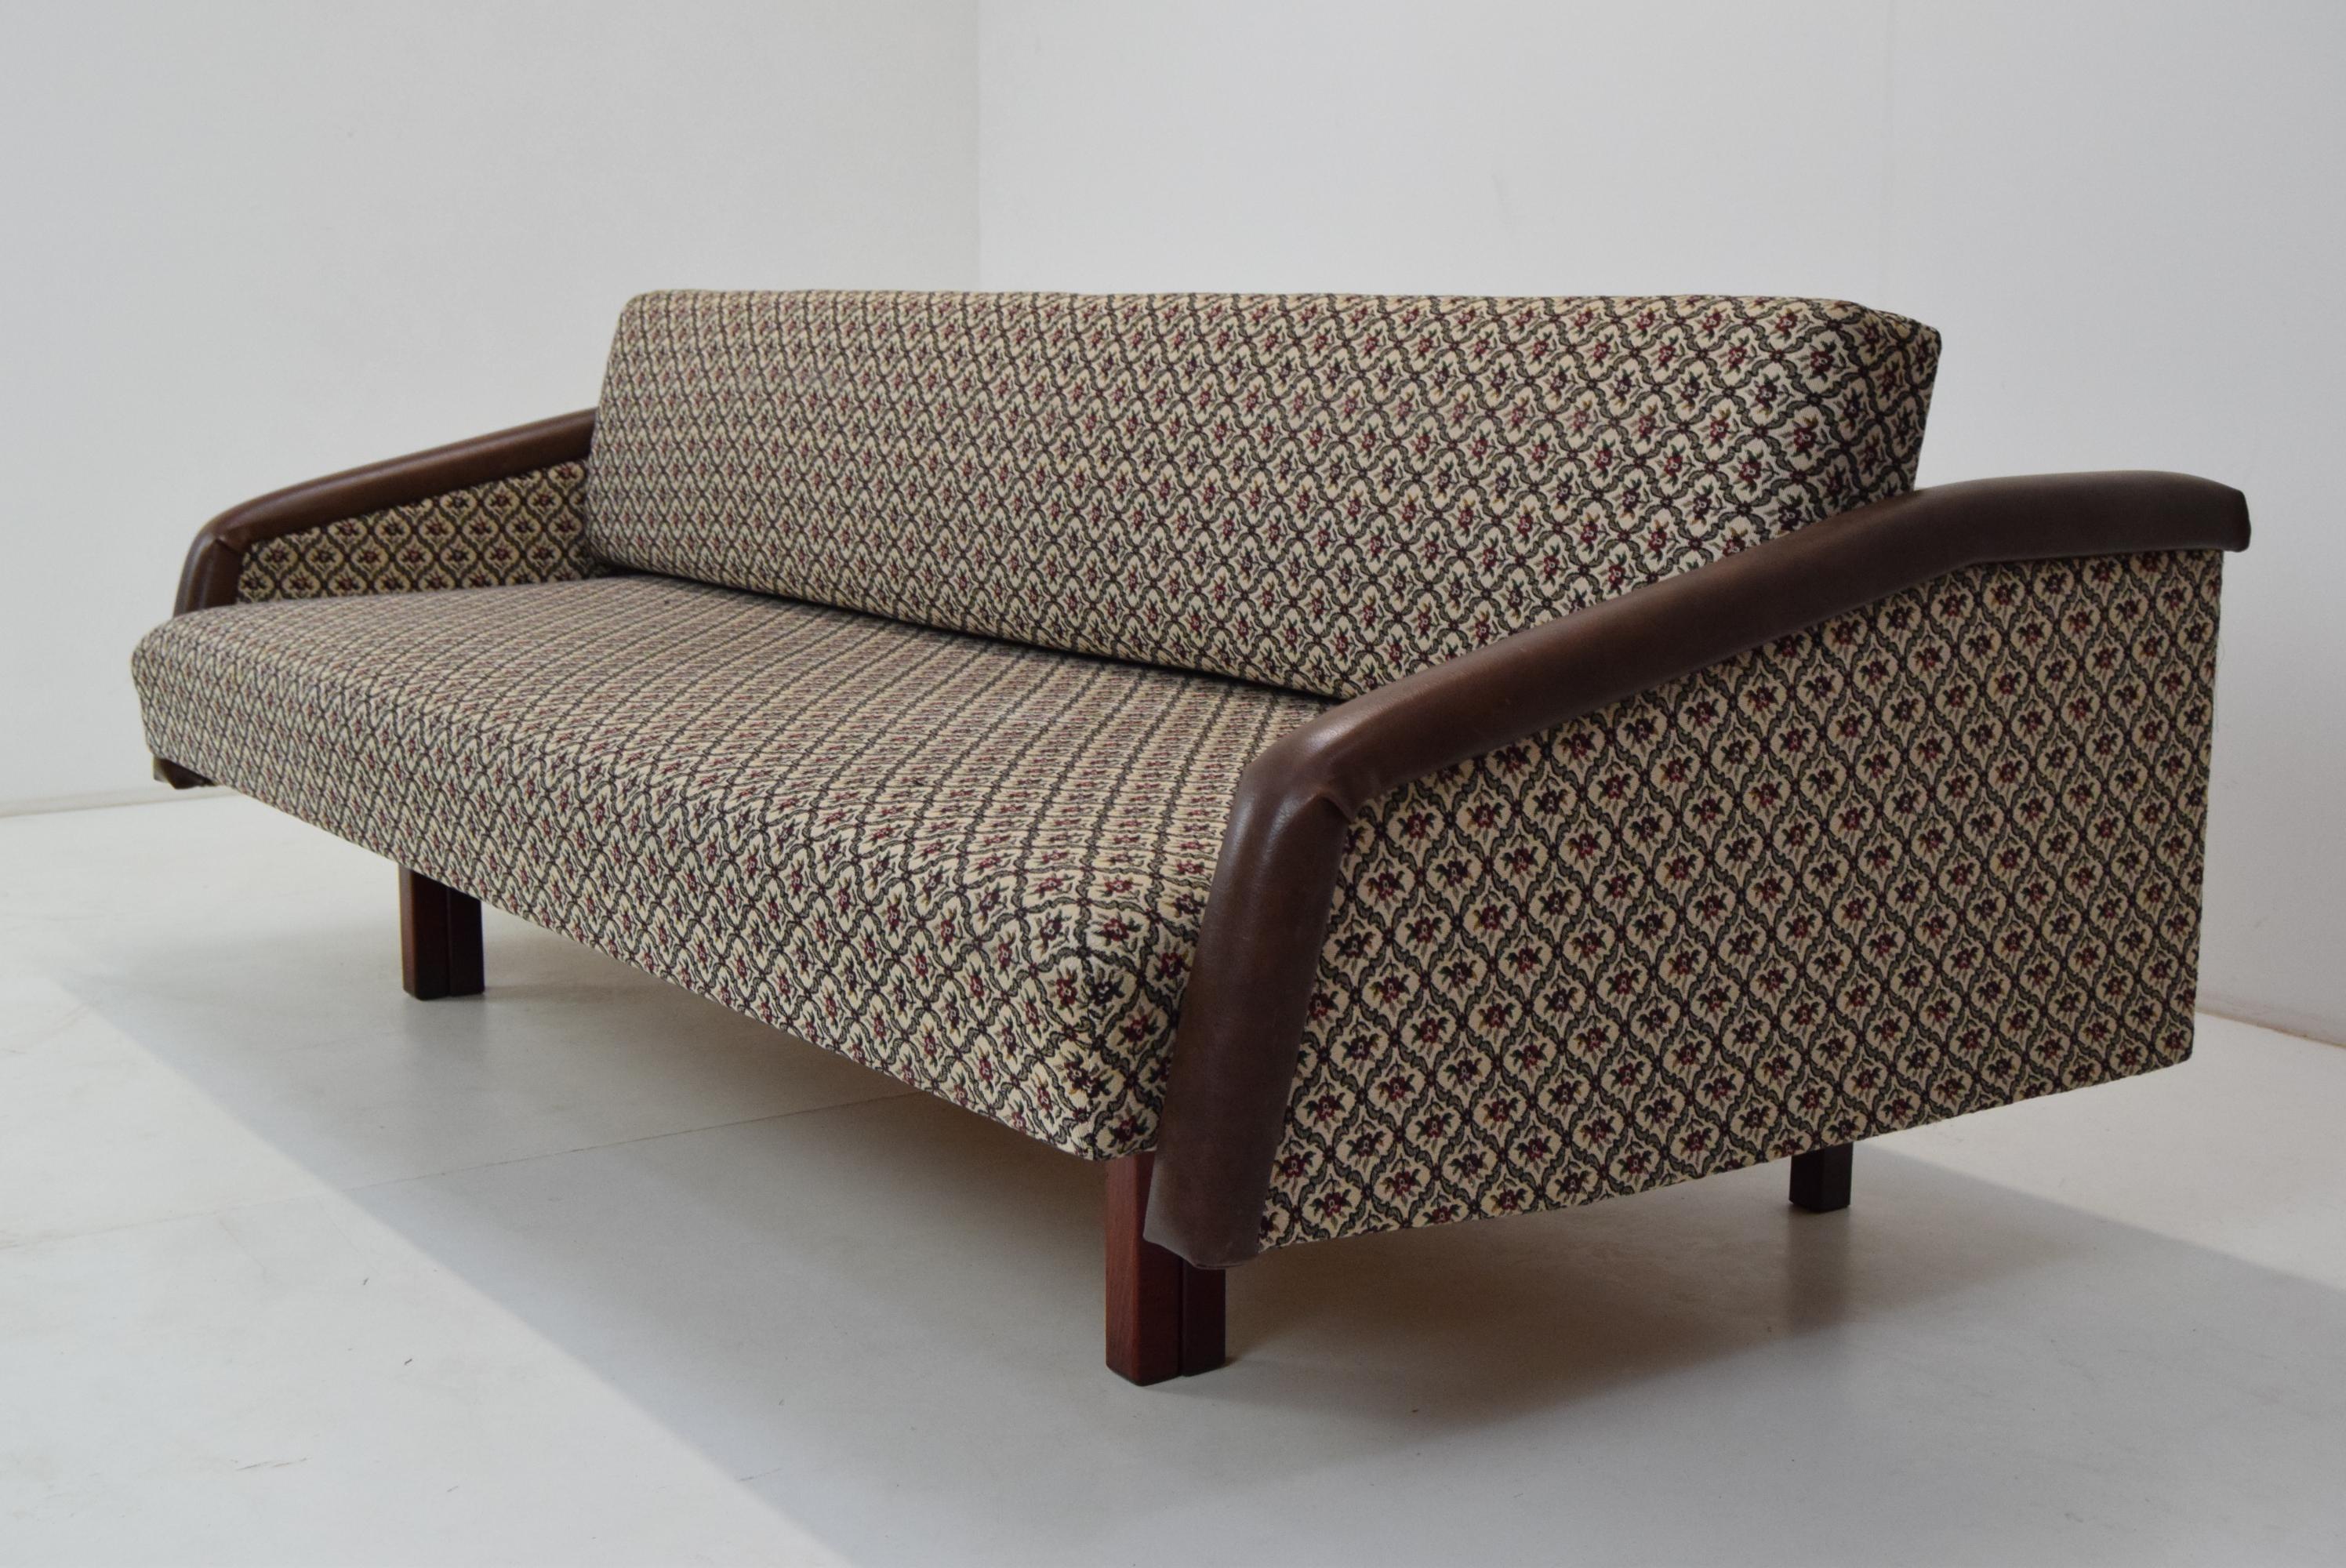 Made in Czechoslovakia
Made of fabric, wood, leatherette
Daybed :Height- 87
 :Depth-136
Original condition.